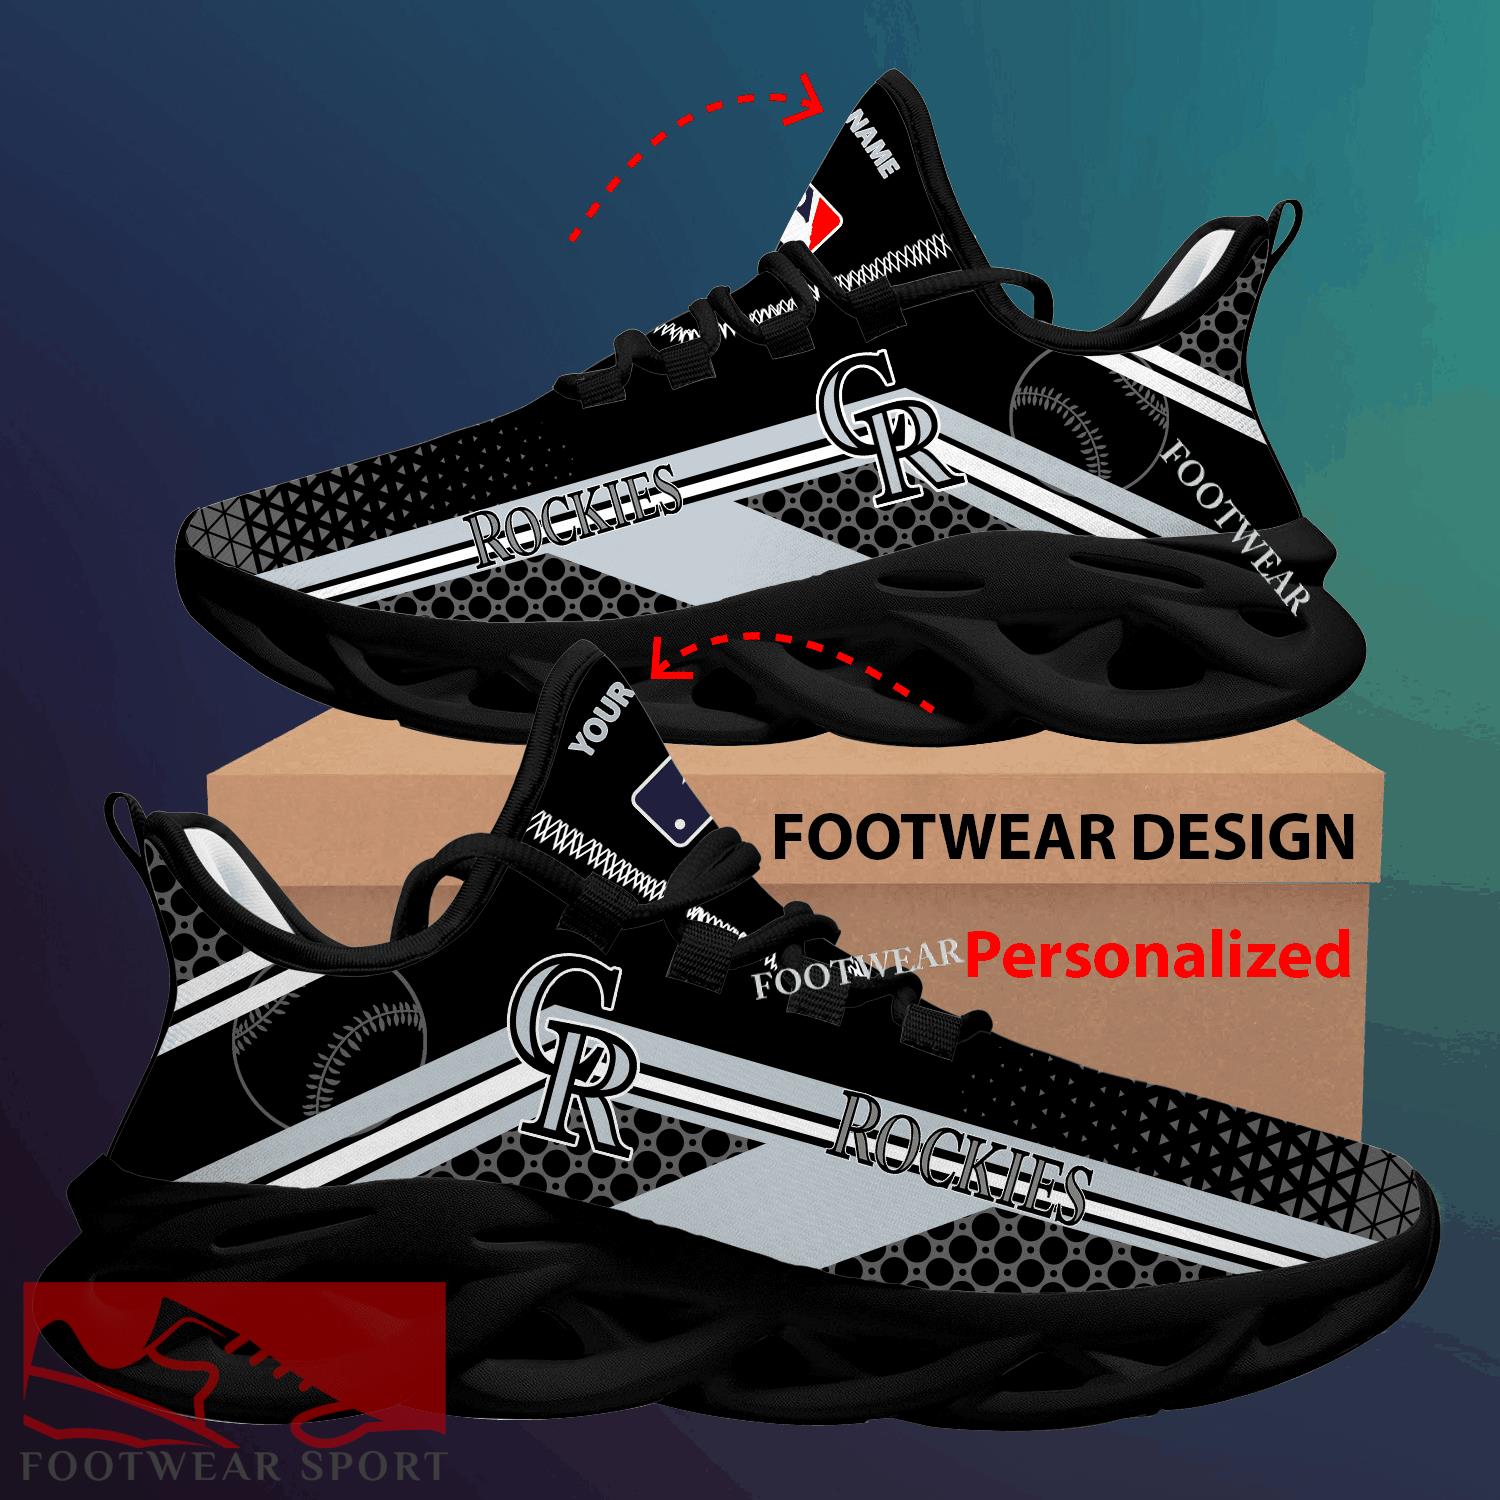 Colorado Rockies Max Soul Shoes New Season Personalized For Men Women Running Sneaker Streetwear Fans - MLB Colorado Rockies Max Soul Shoes New Season Personalized Photo 2